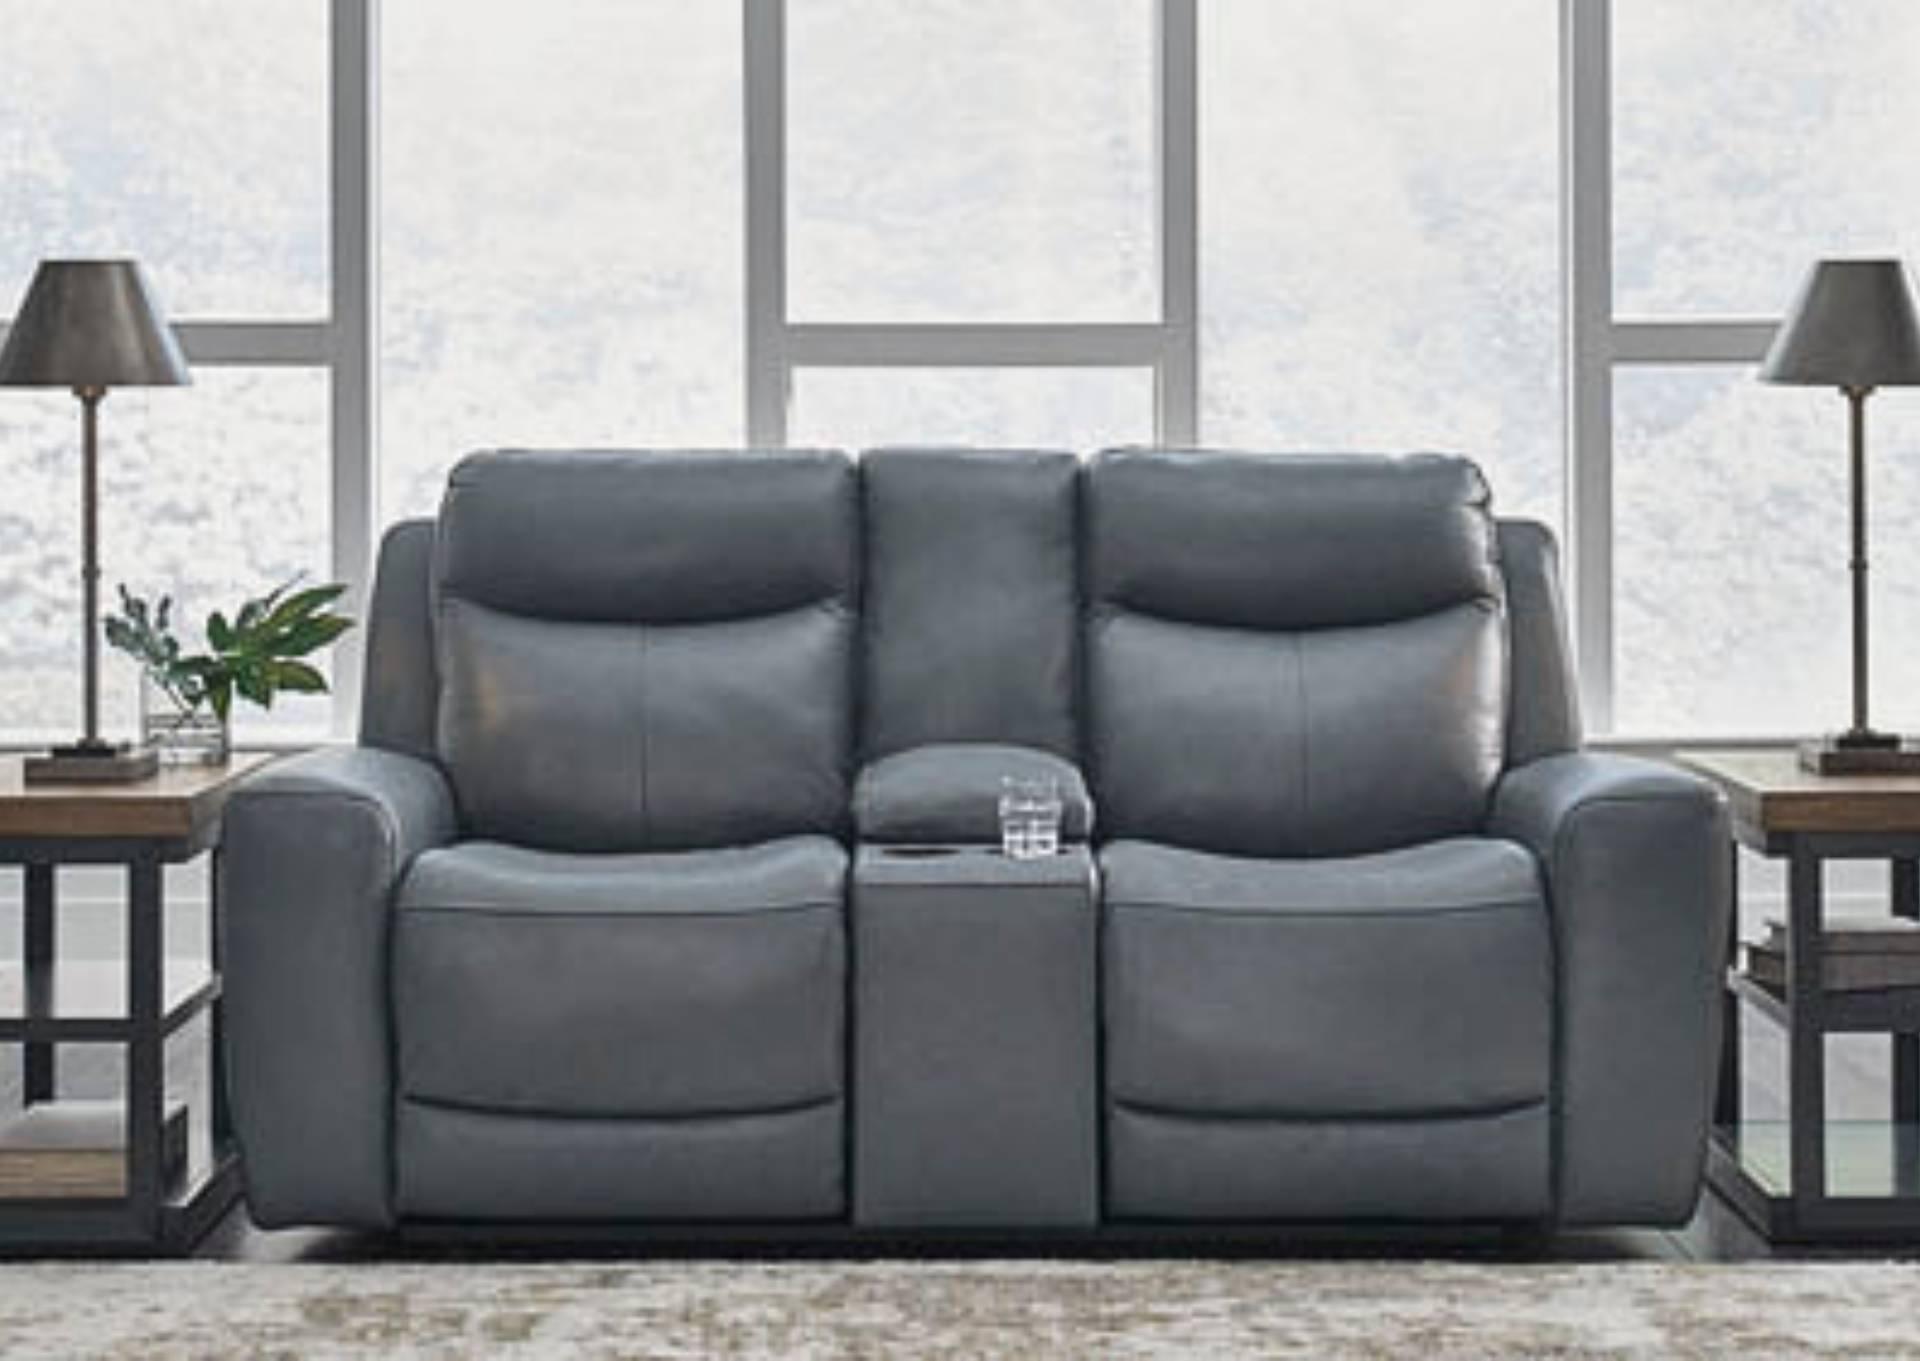 MINDANAO STEEL LEATHER 2P POWER RECLINING LOVESEAT WITH CONSOLE,ASHLEY FURNITURE INC.